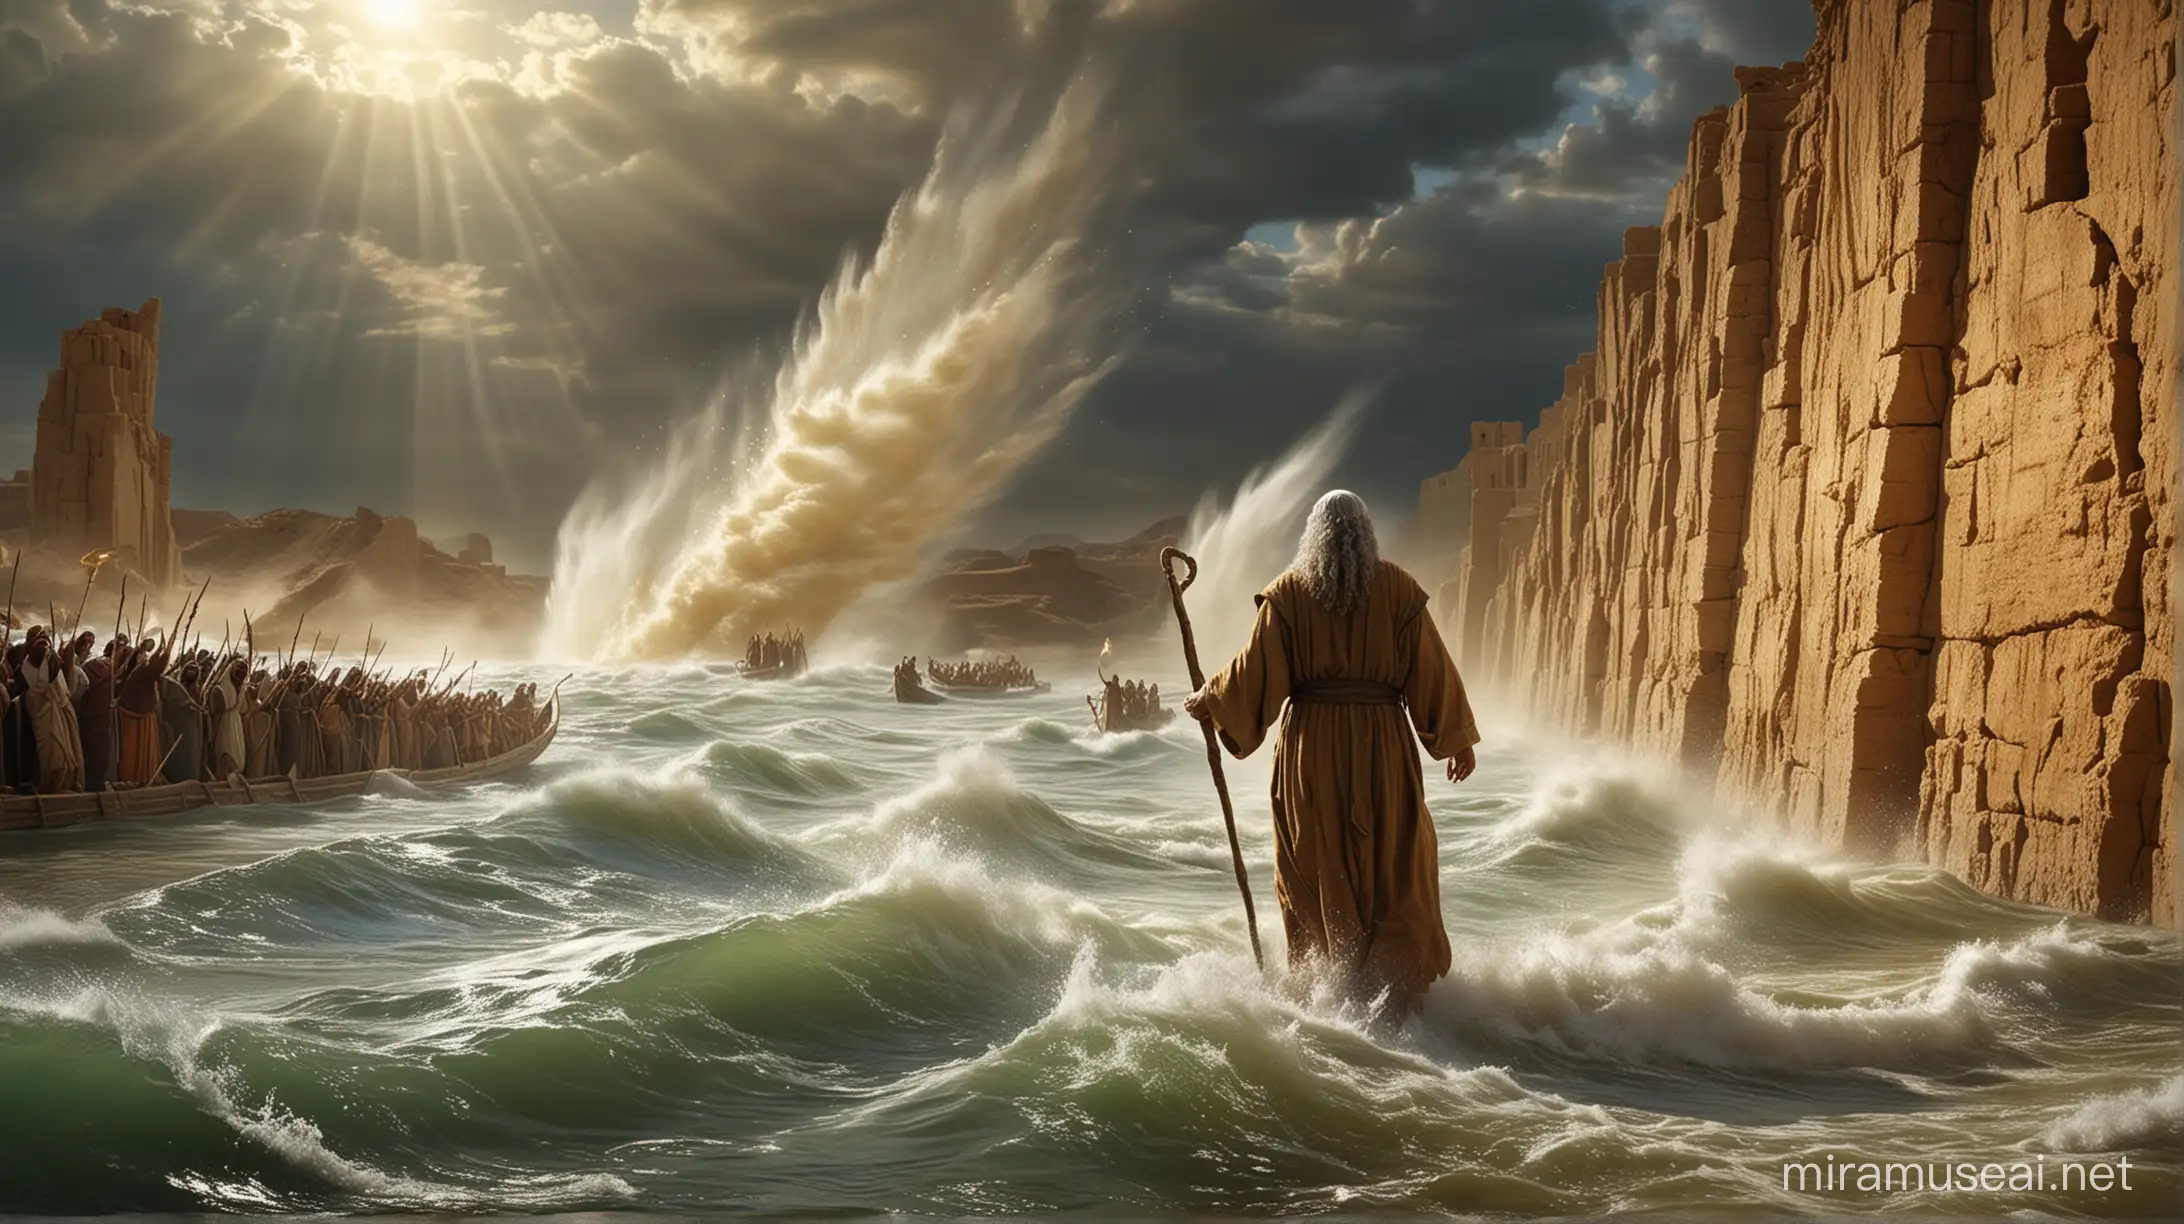 Prophet Moses Parting the Sea with Divine Intervention